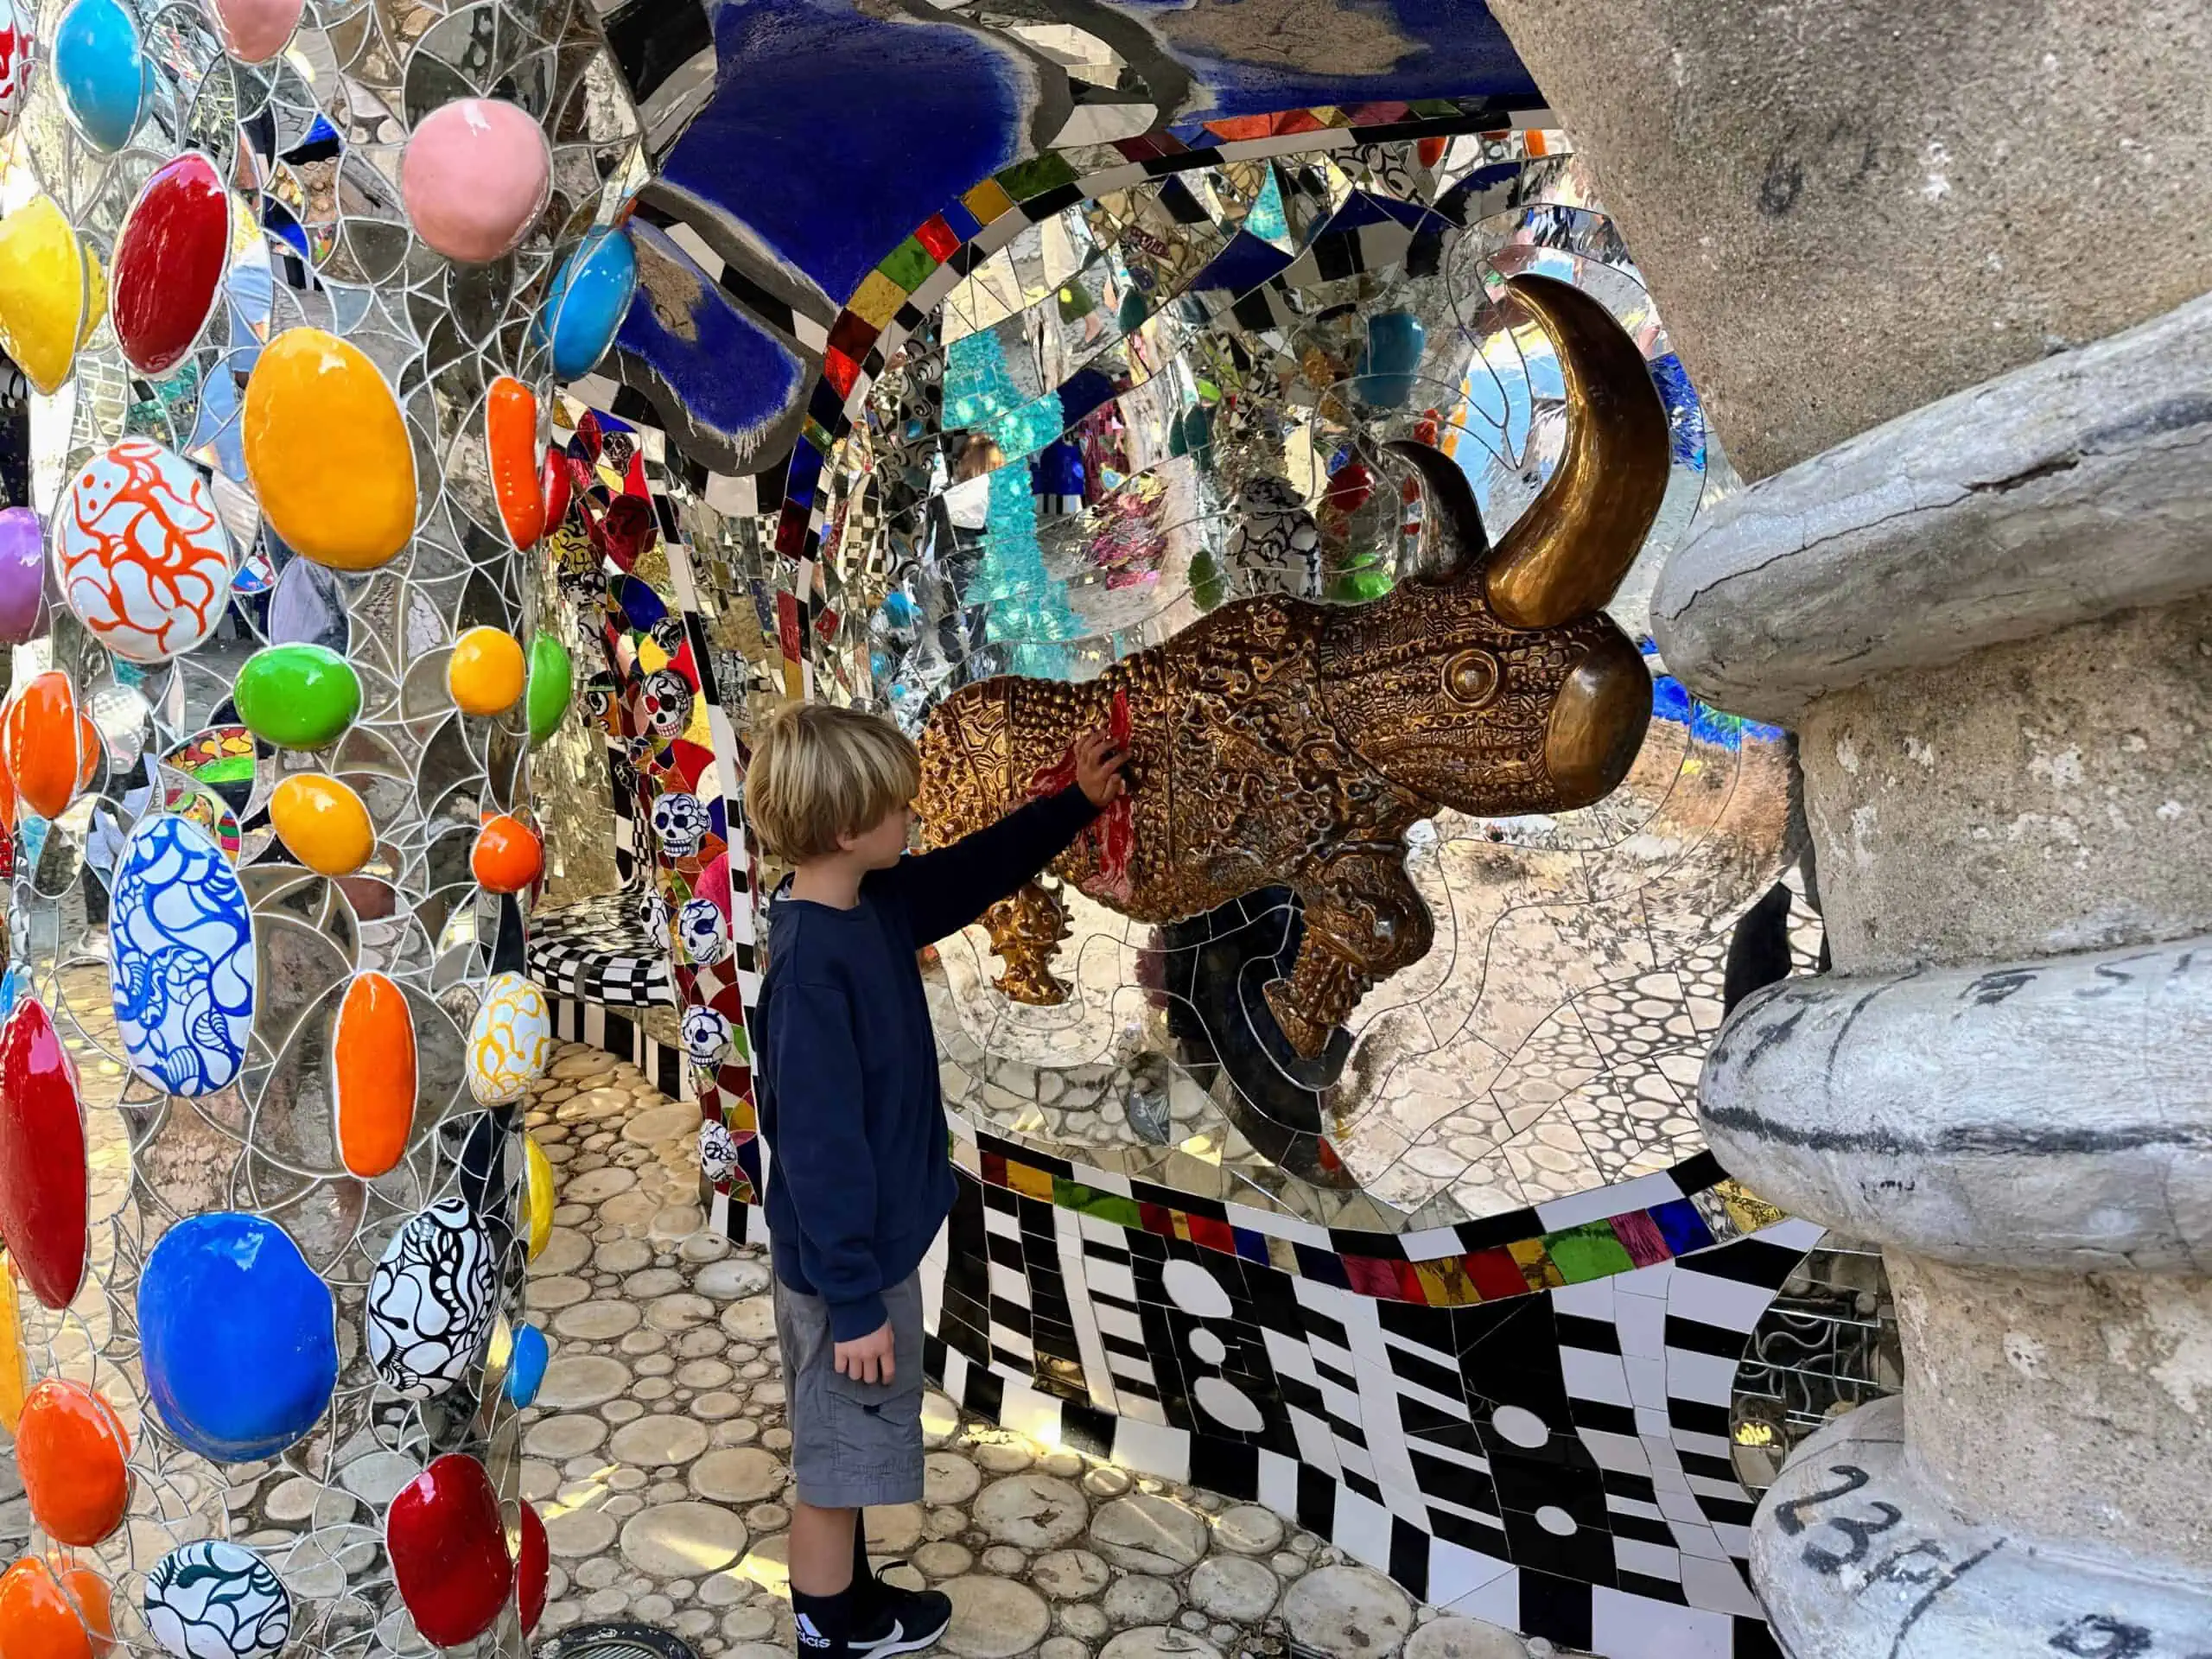 Boy touches colorful rhino sculpture in Italy. The walls and columns around are made of colorful ceramics and glass mosaics.